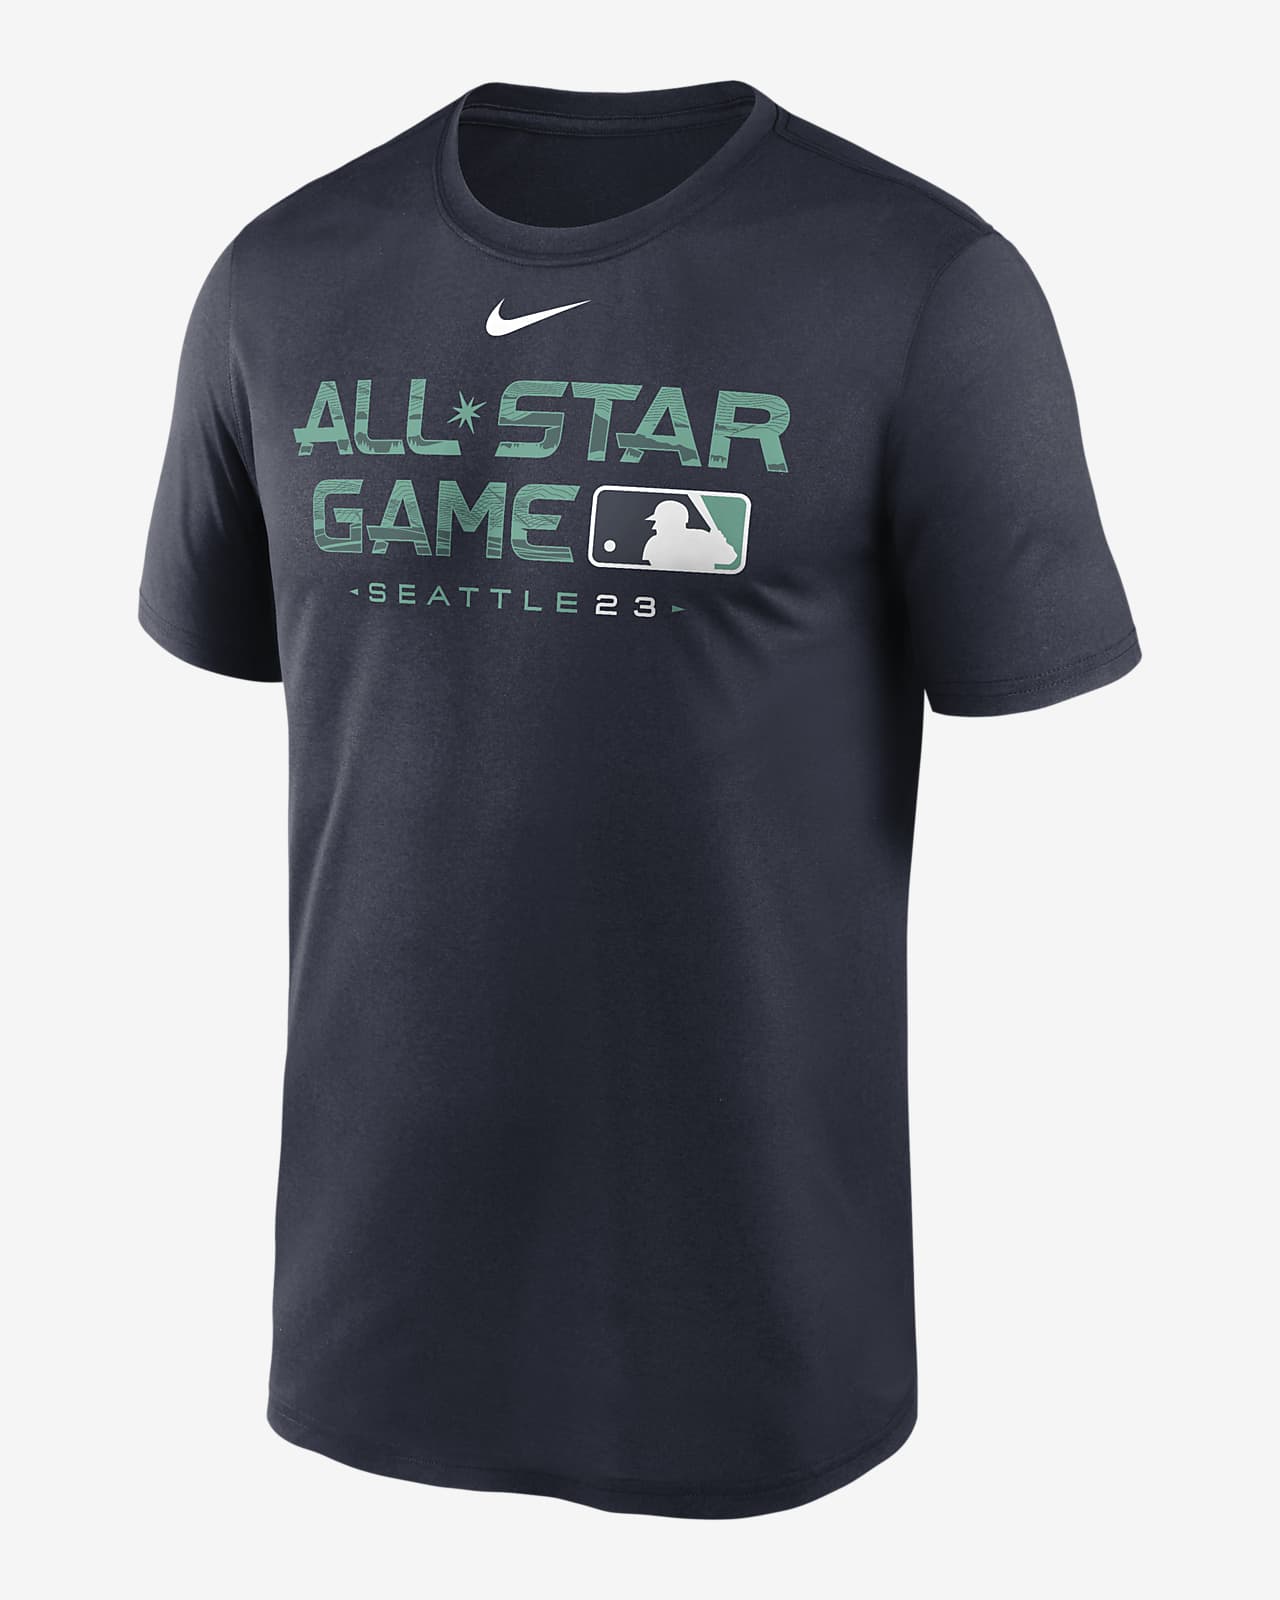 Seattle Mariners All-Star Game MLB Jerseys for sale